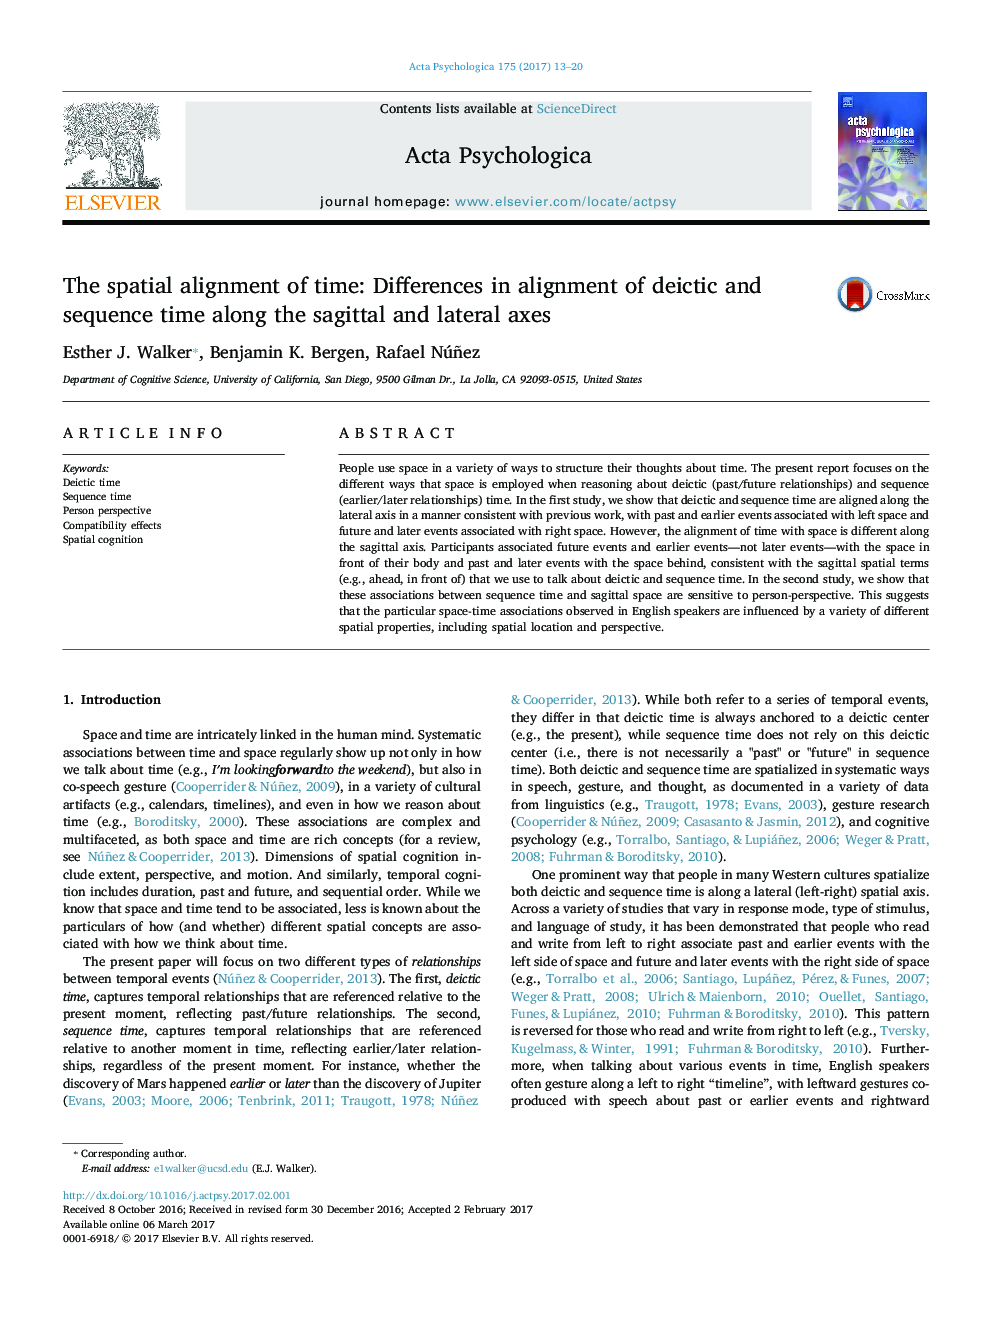 The spatial alignment of time: Differences in alignment of deictic and sequence time along the sagittal and lateral axes